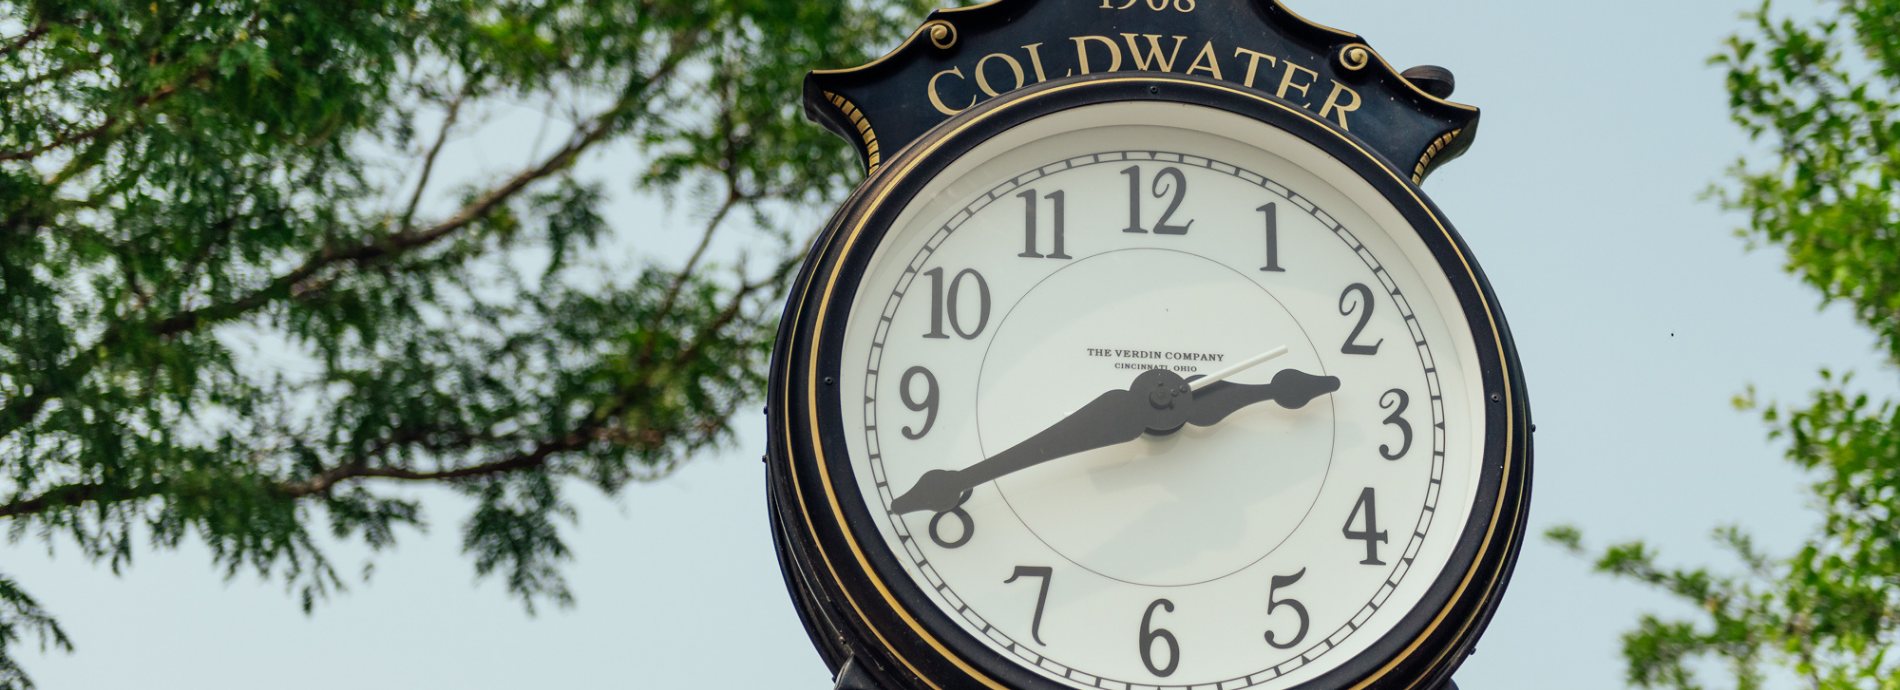 Coldwater clock